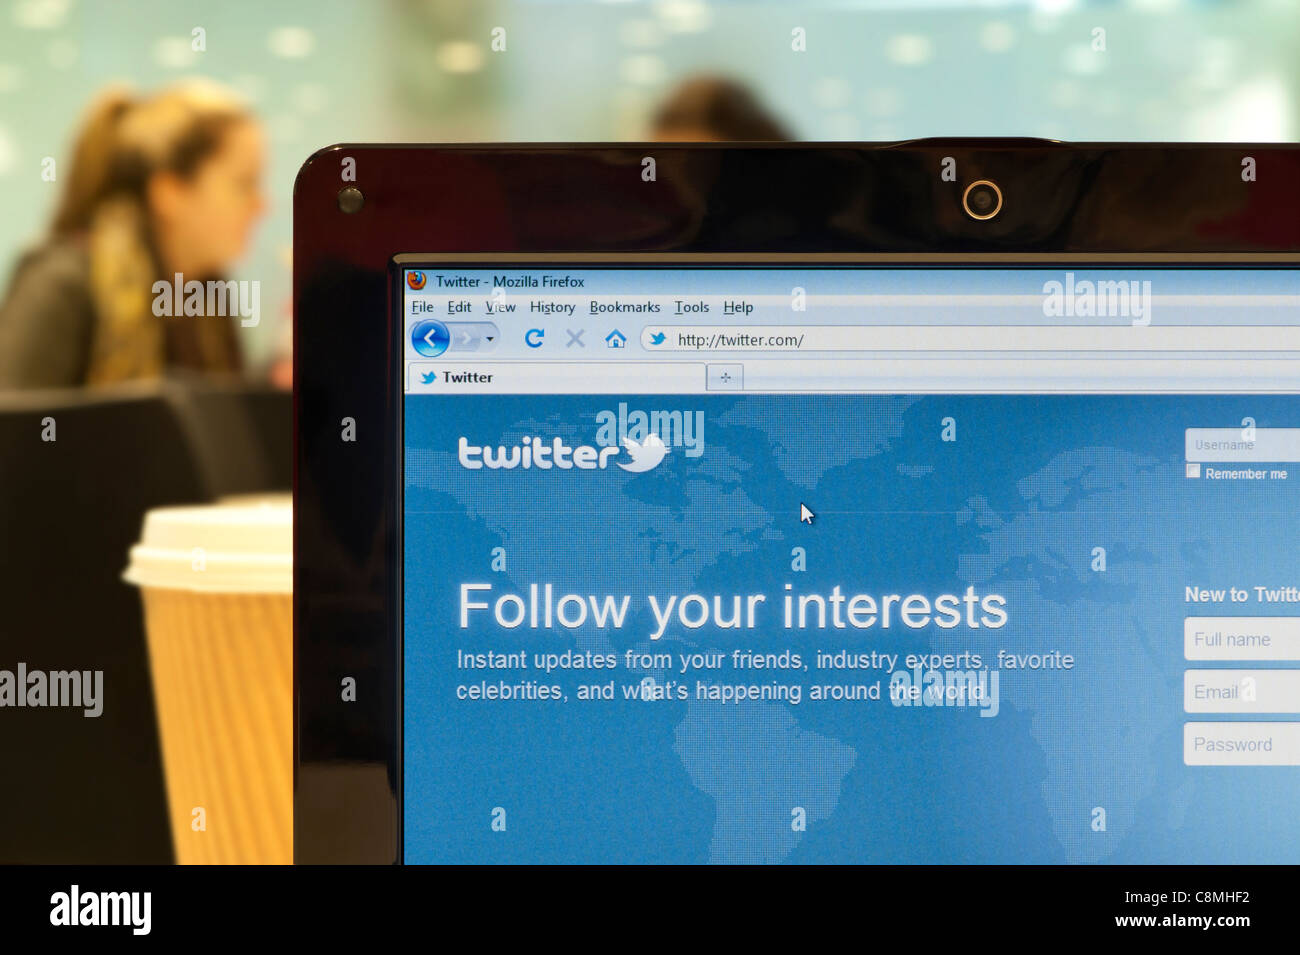 The Twitter website shot in a coffee shop environment (Editorial use only: print, TV, e-book and editorial website). Stock Photo